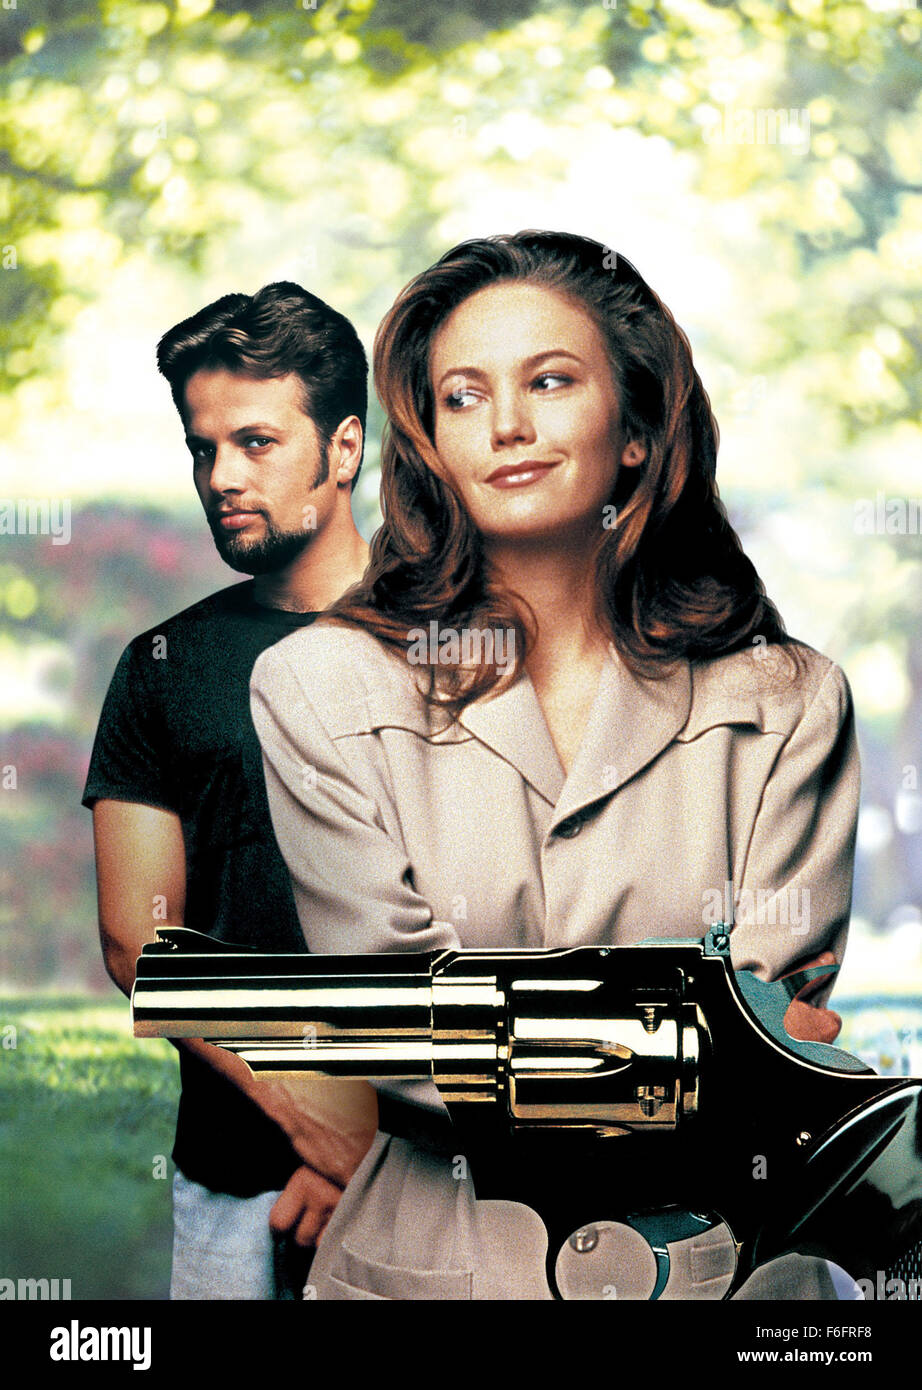 RELEASE DATE: October 26, 1992. MOVIE TITLE: My New Gun. STUDIO: IRS Media. PLOT: Debbie and Gerald's lives drastically change after they get a gun. Their mysterious neighbor, Skippy, becomes and important and transforming figure in their lives. PICTURED: DIANE LANE as Debbie Bender and JAMES LEGROS as Skippy. Stock Photo